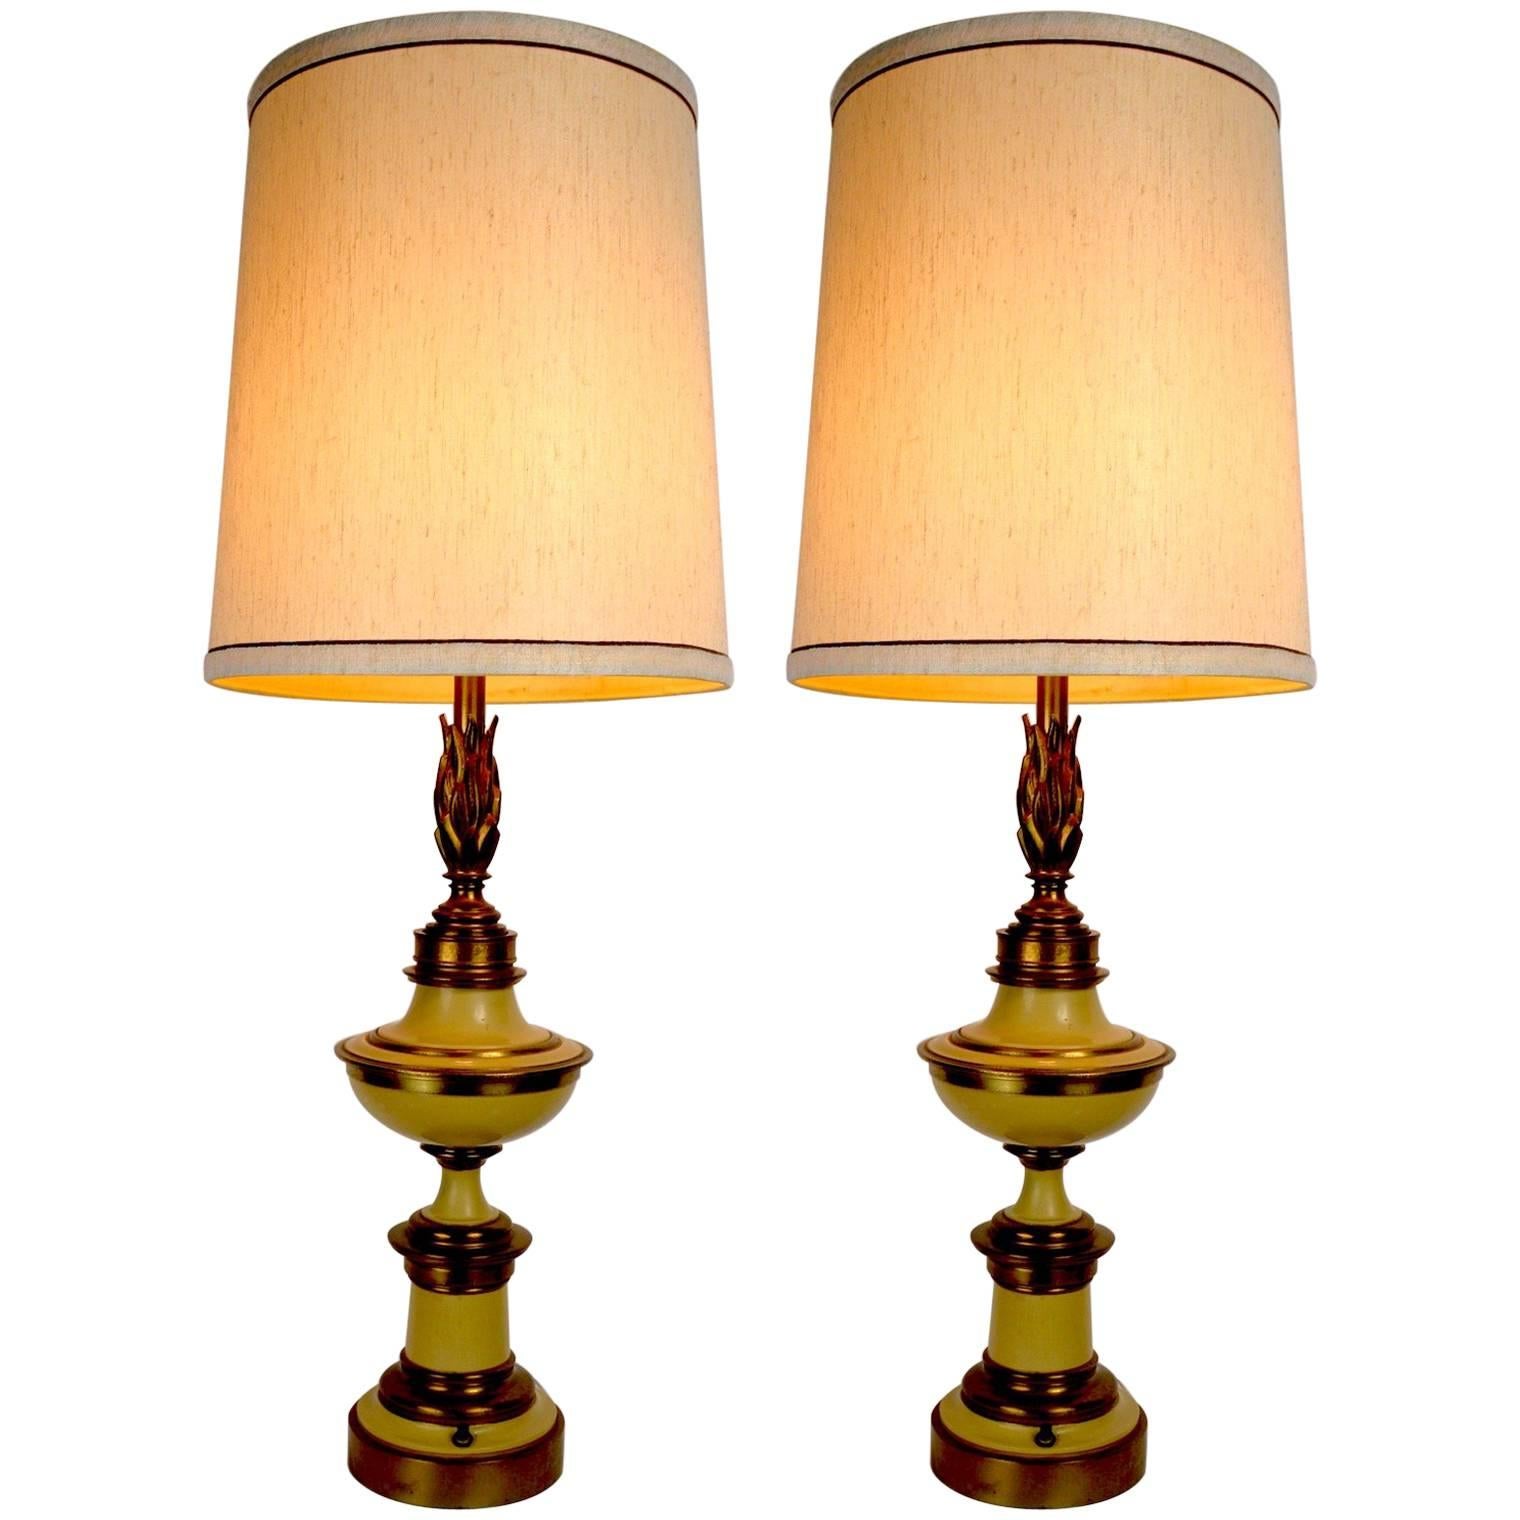 Pair of Flame Motif Lamps Attributed to Stiffel